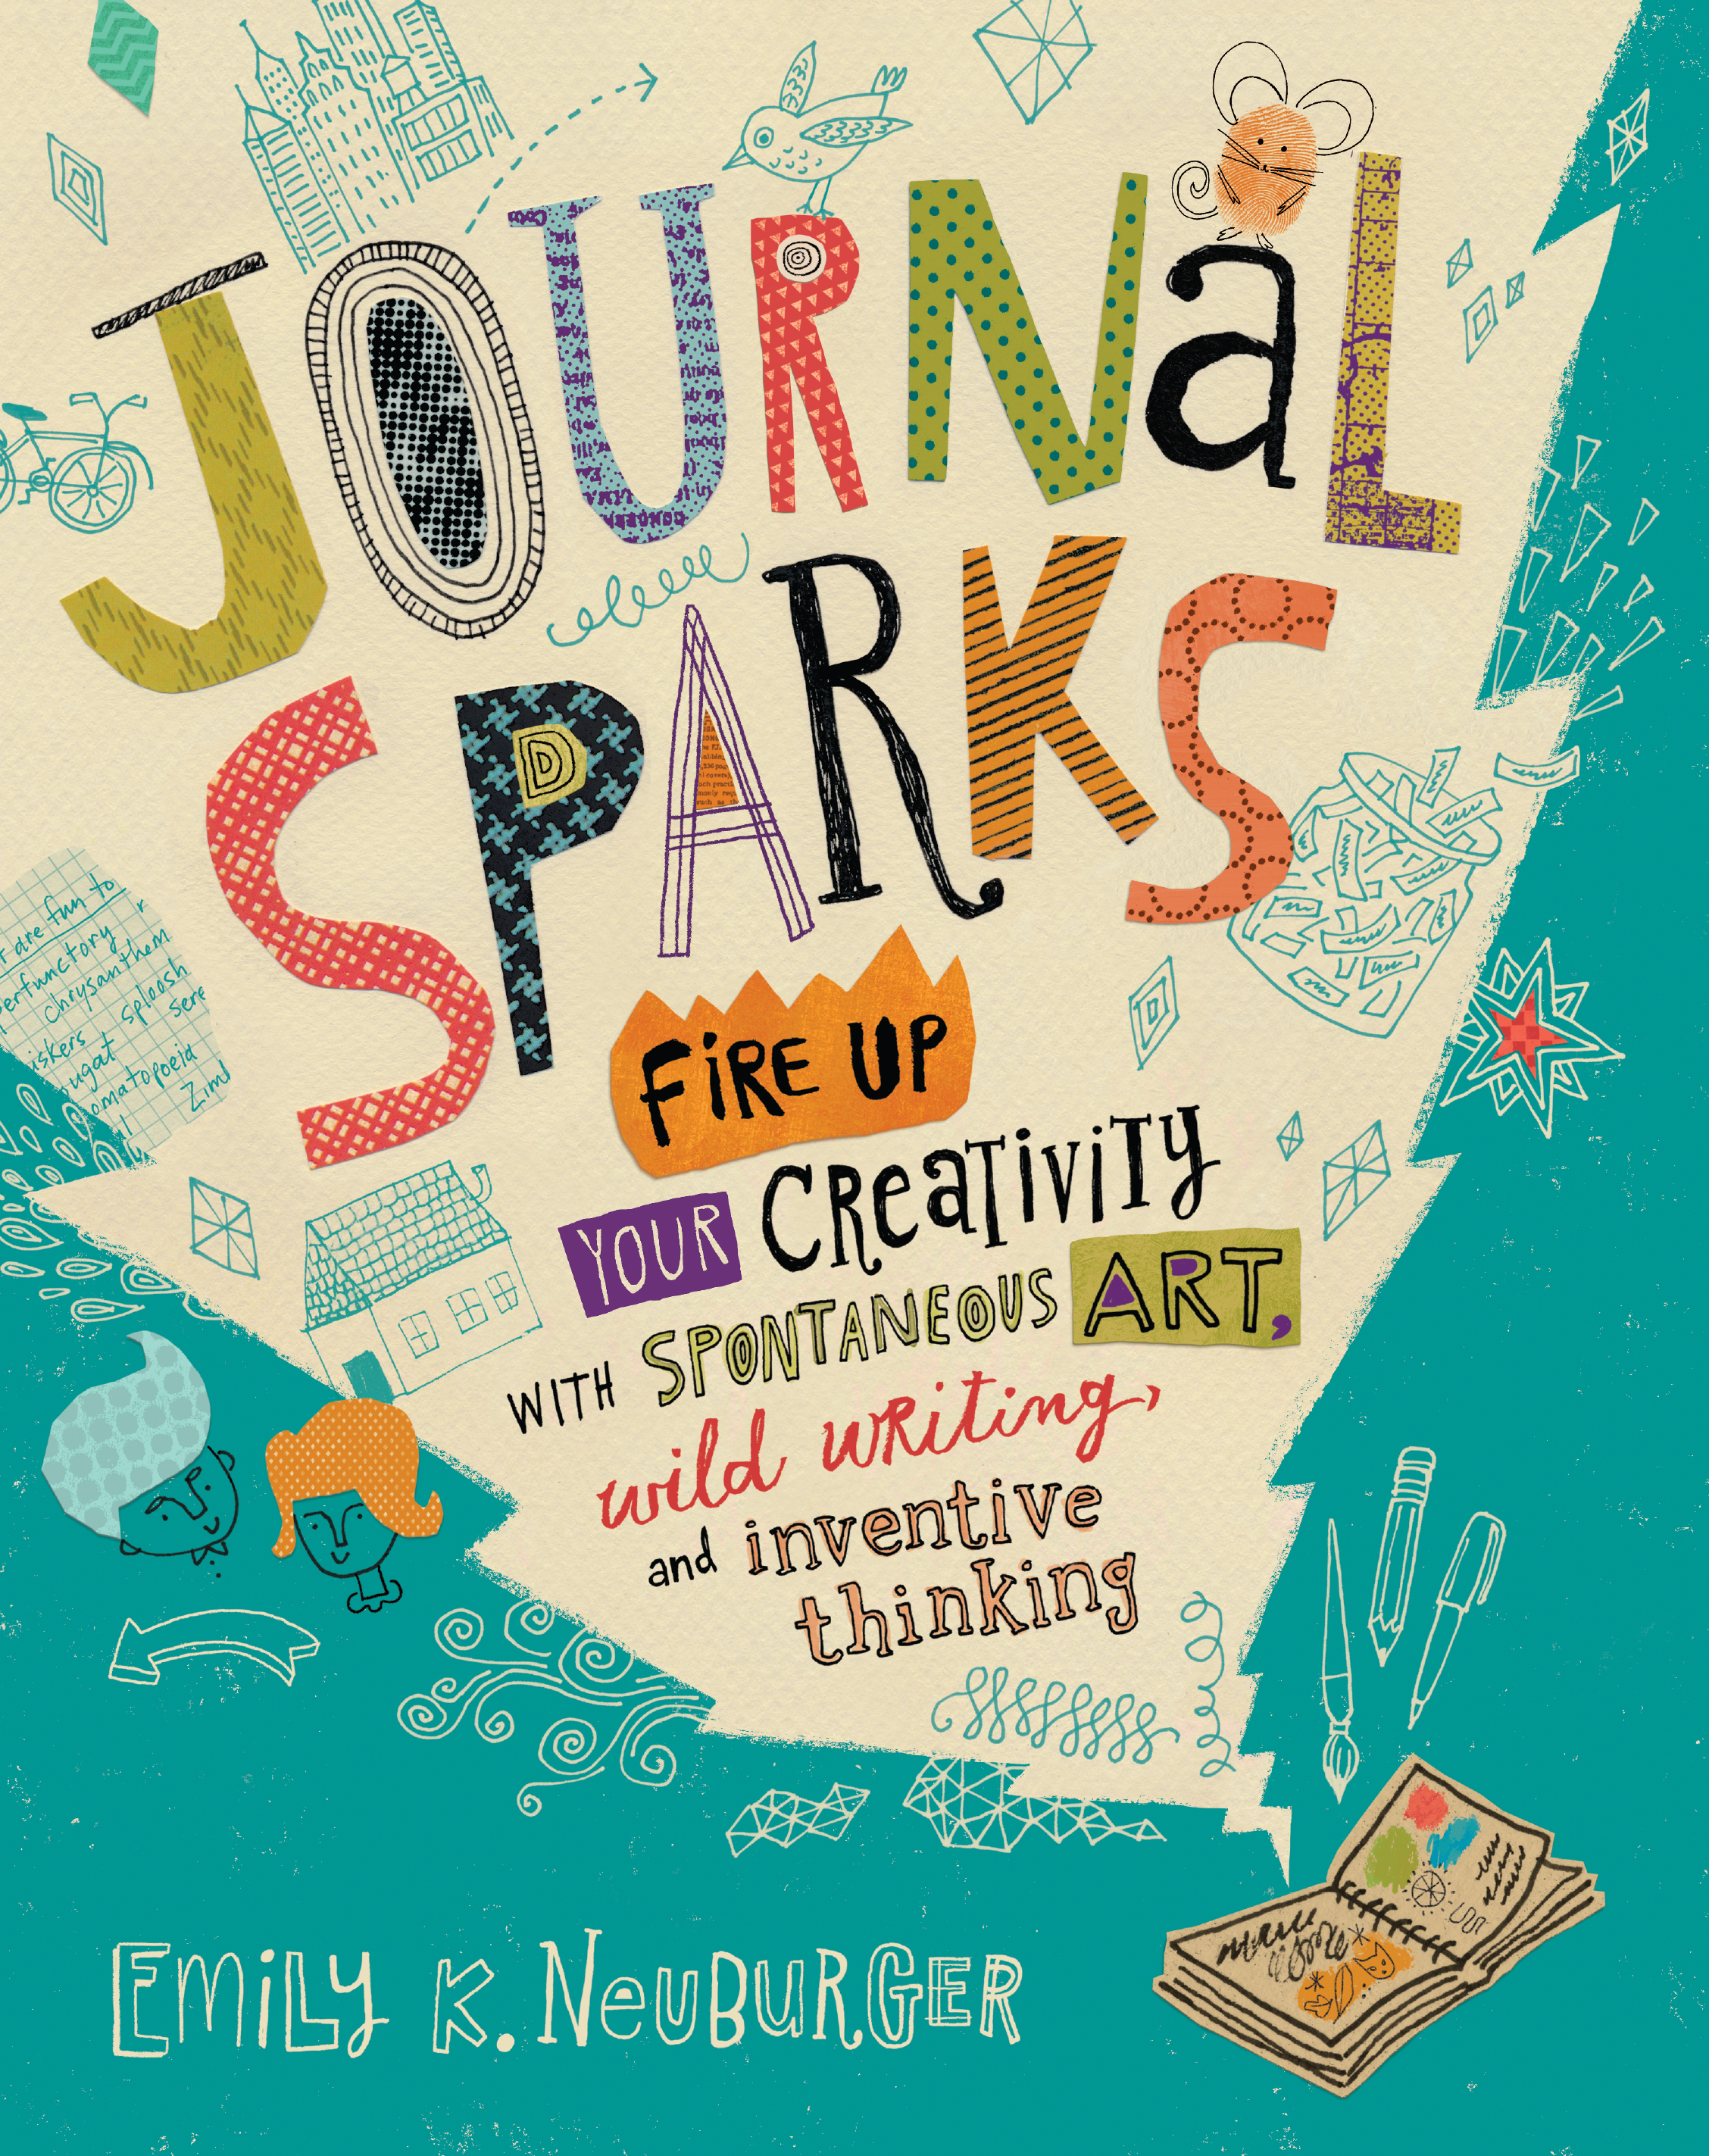 Journal Sparks: Fire Up Your Creativity with Spontaneous Art, Wild Writing, and Inventive Thinking